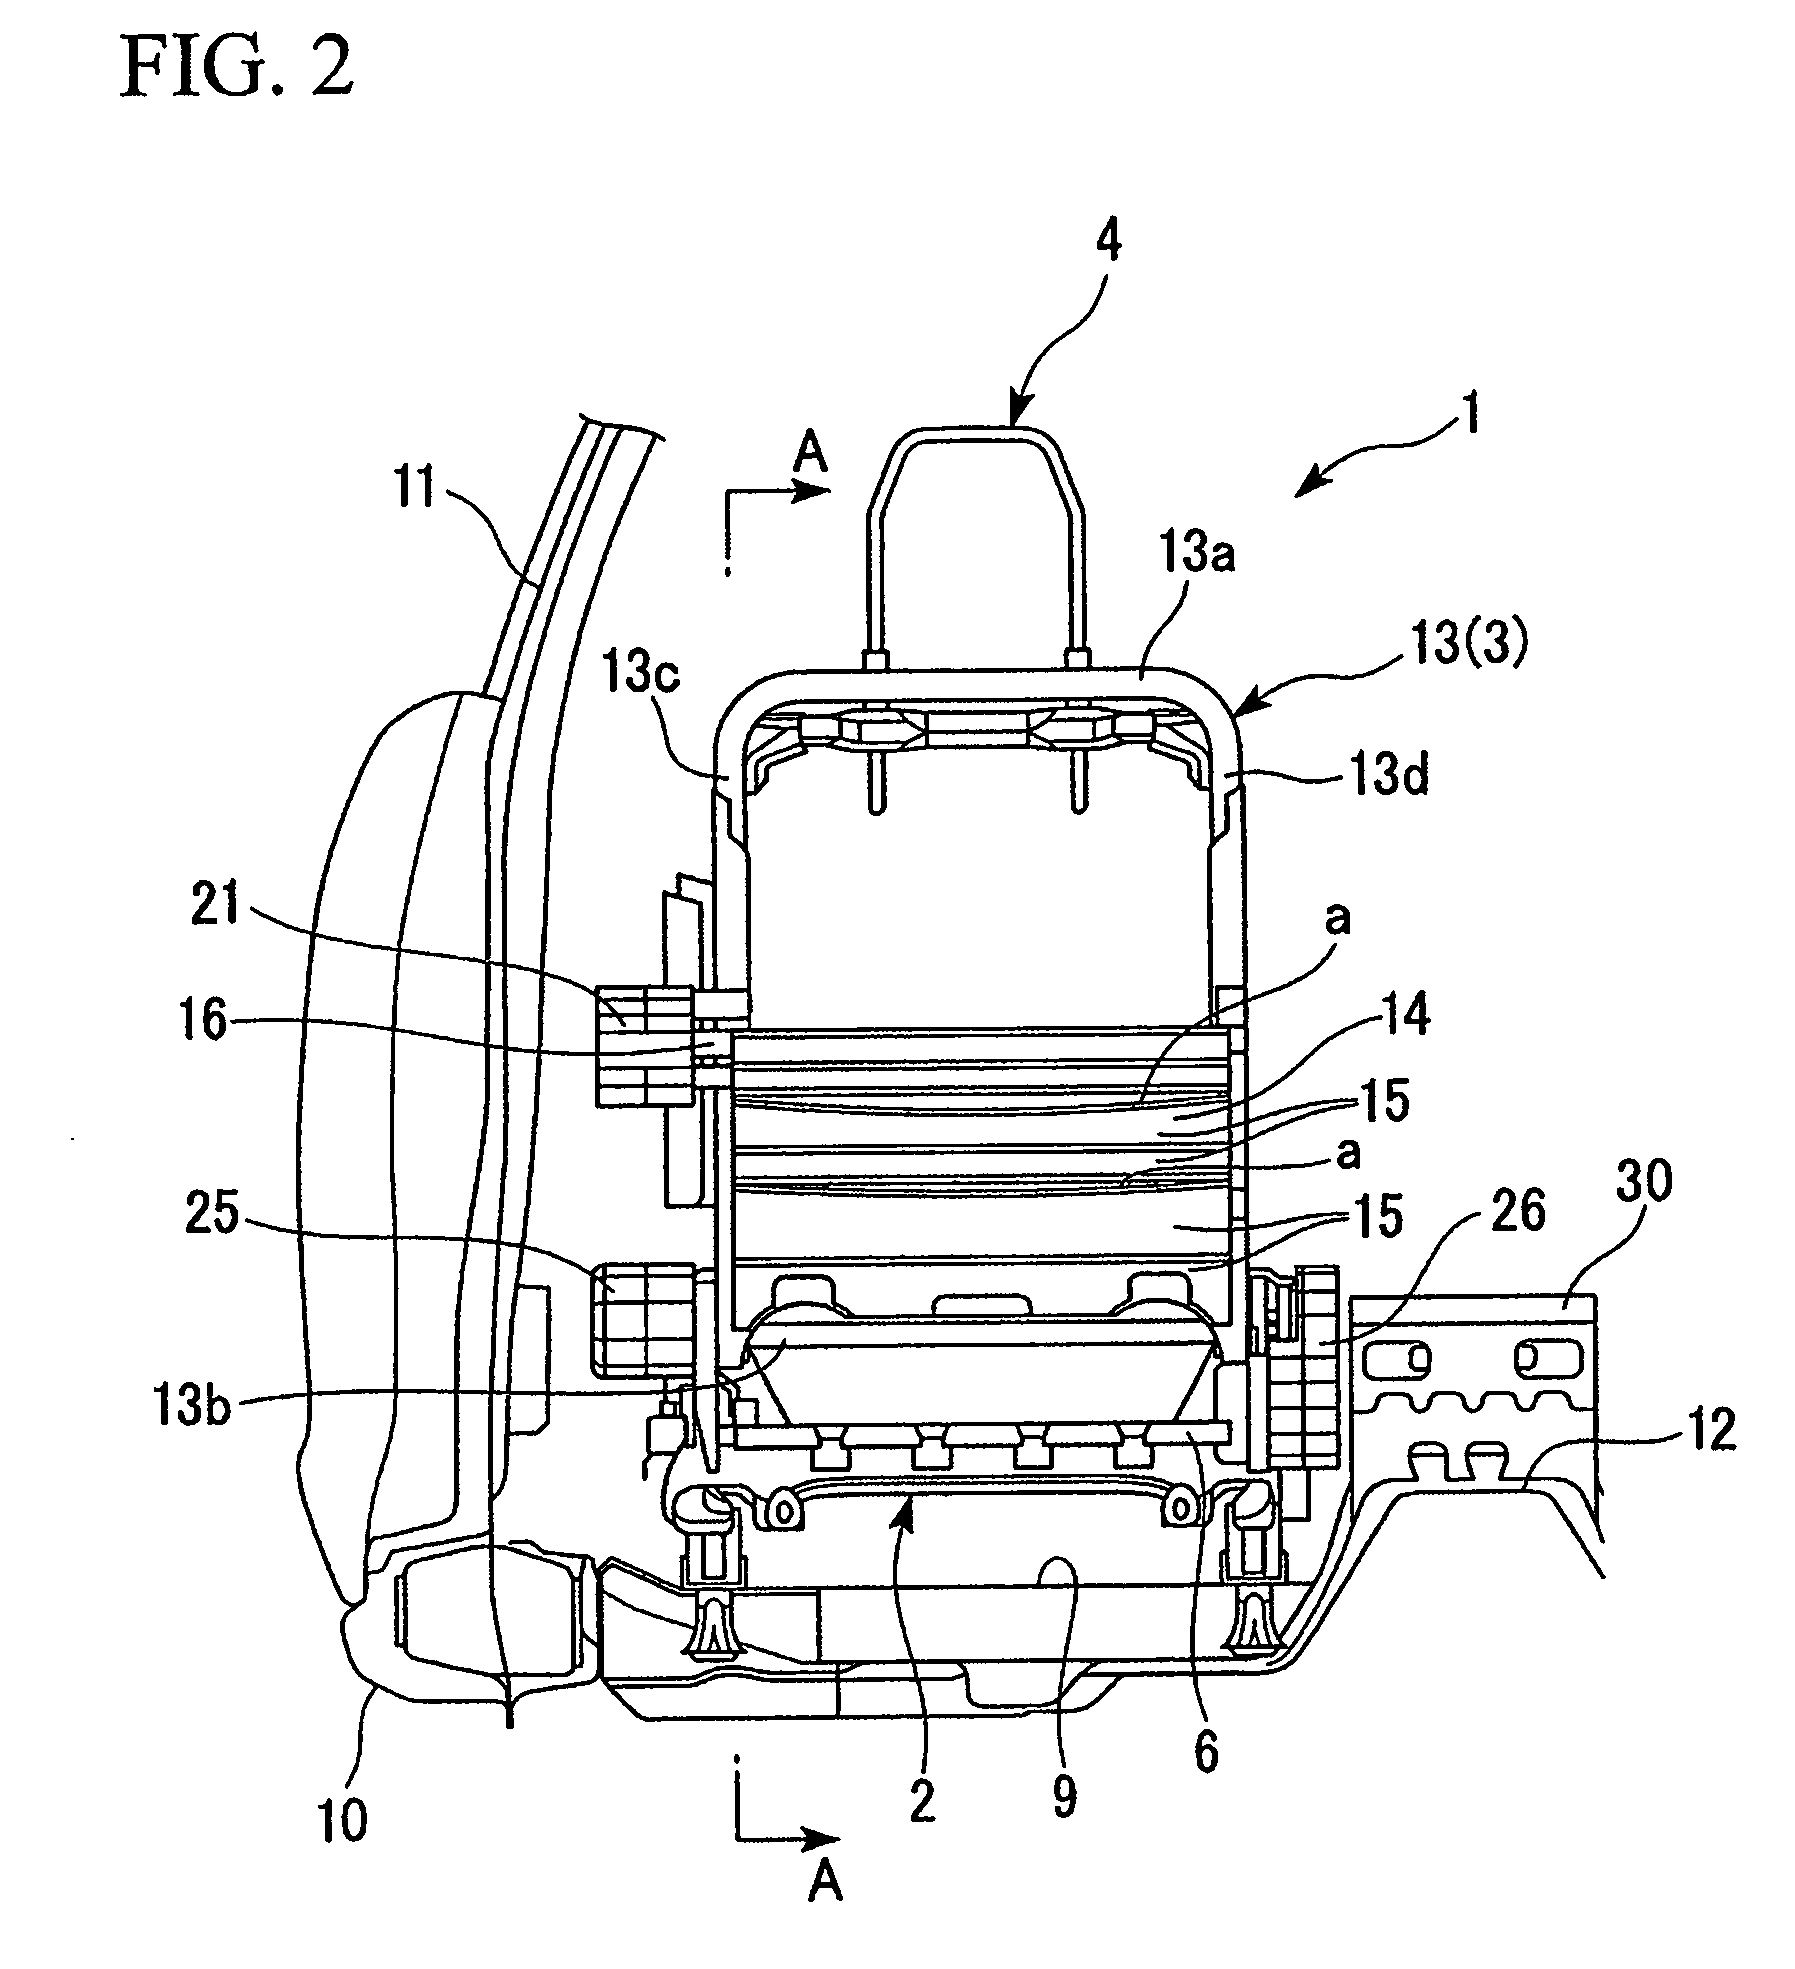 Load transmission body for vehicle